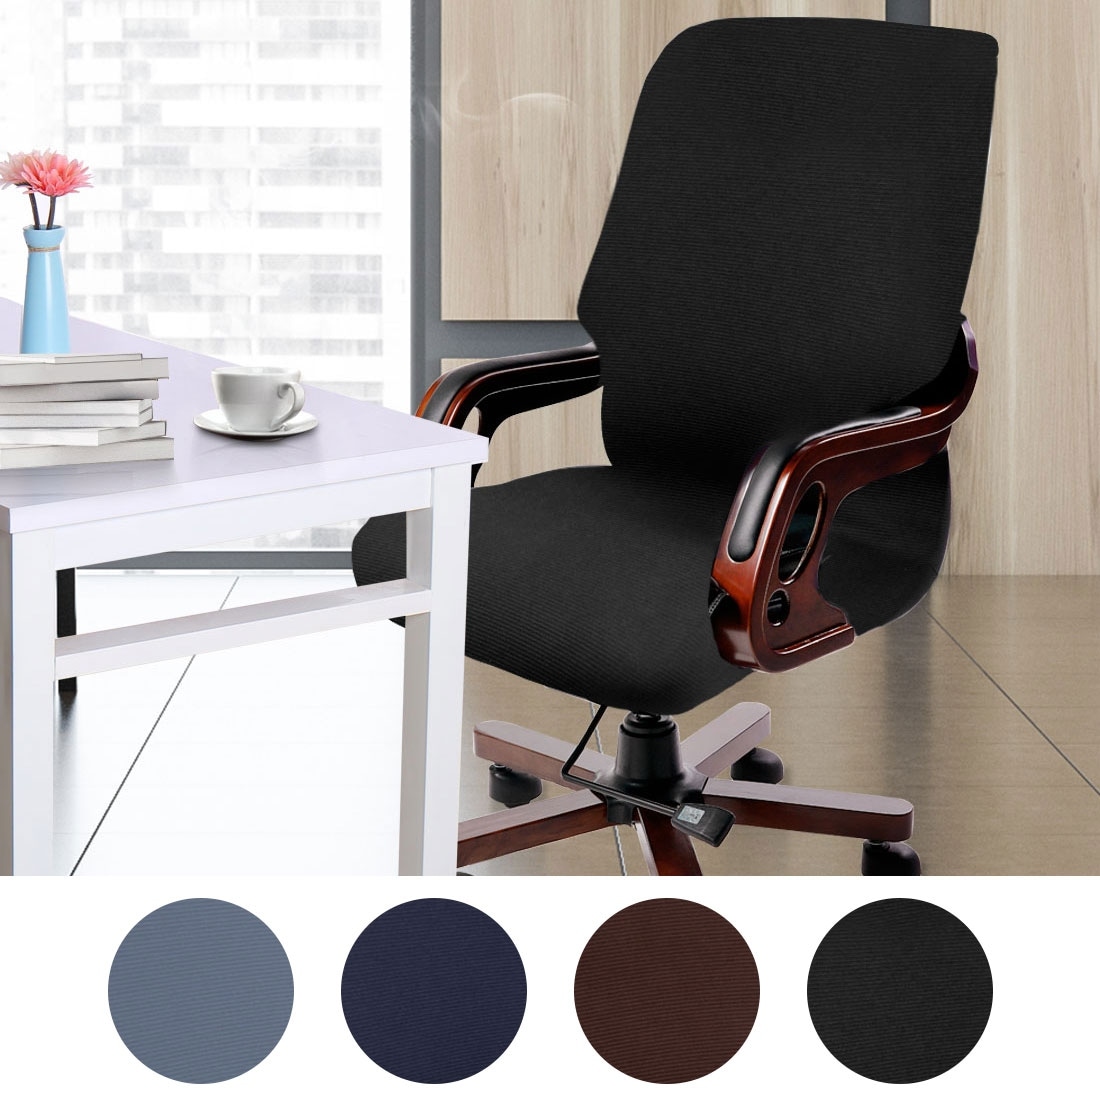 https://ak1.ostkcdn.com/images/products/is/images/direct/74a7cb4b1212a4631d7ddc6d291de158f9782118/Waterproof-Jacquard-Office-Chair-Cover-Roating-Chair-Computer-Armchair-Protector.jpg